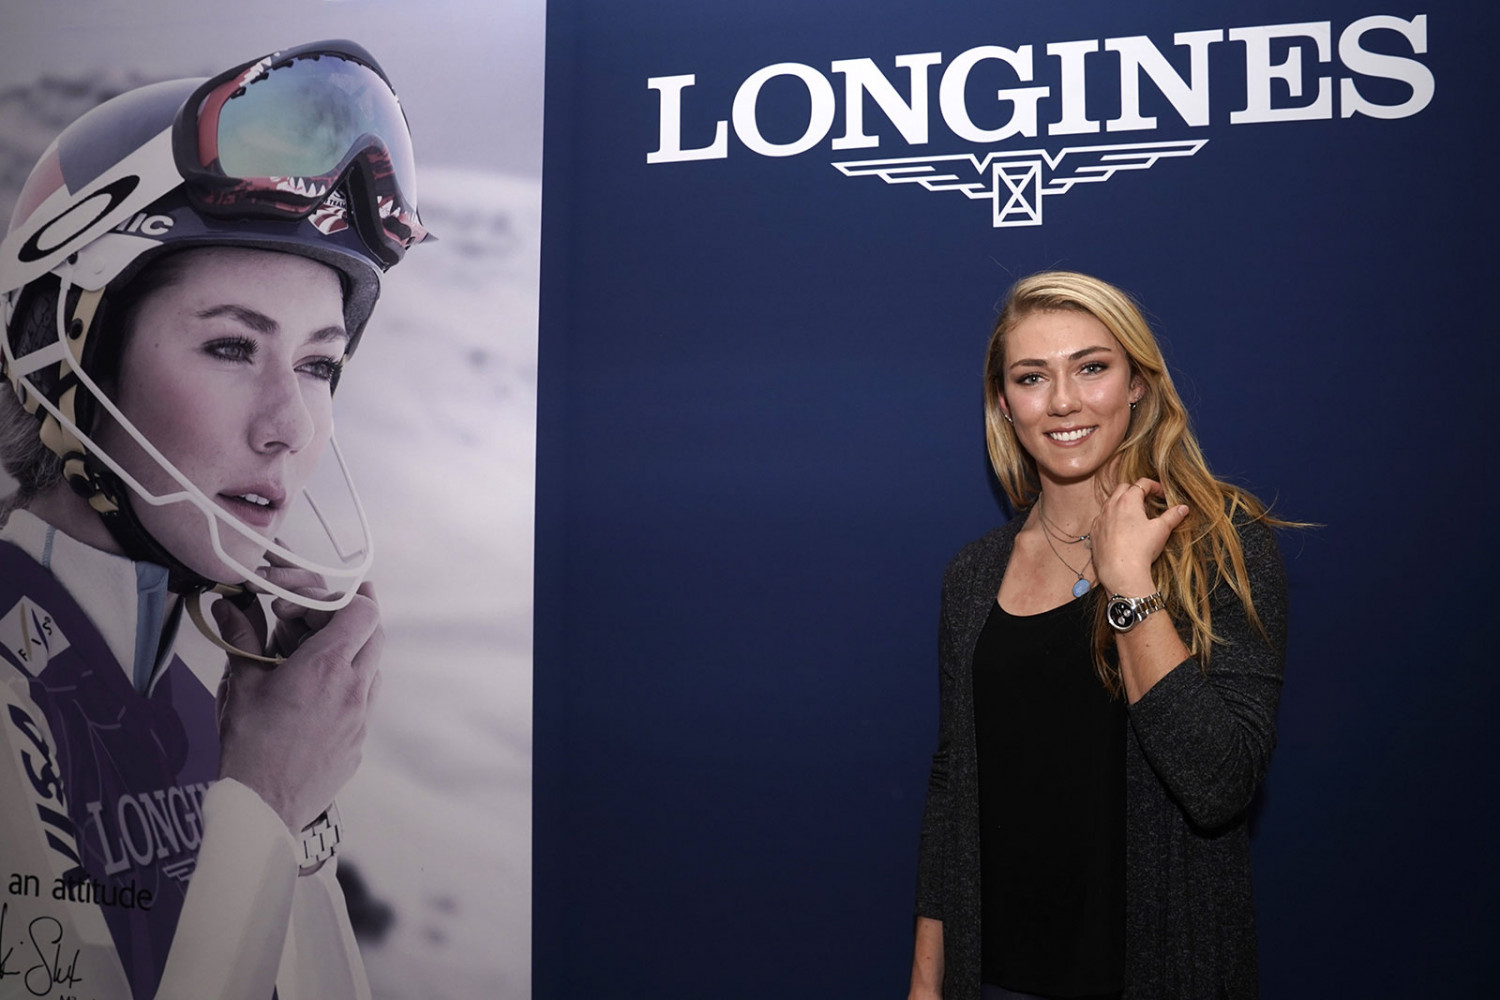 Longines Conquest Chronograph by Mikaela Shiffrin